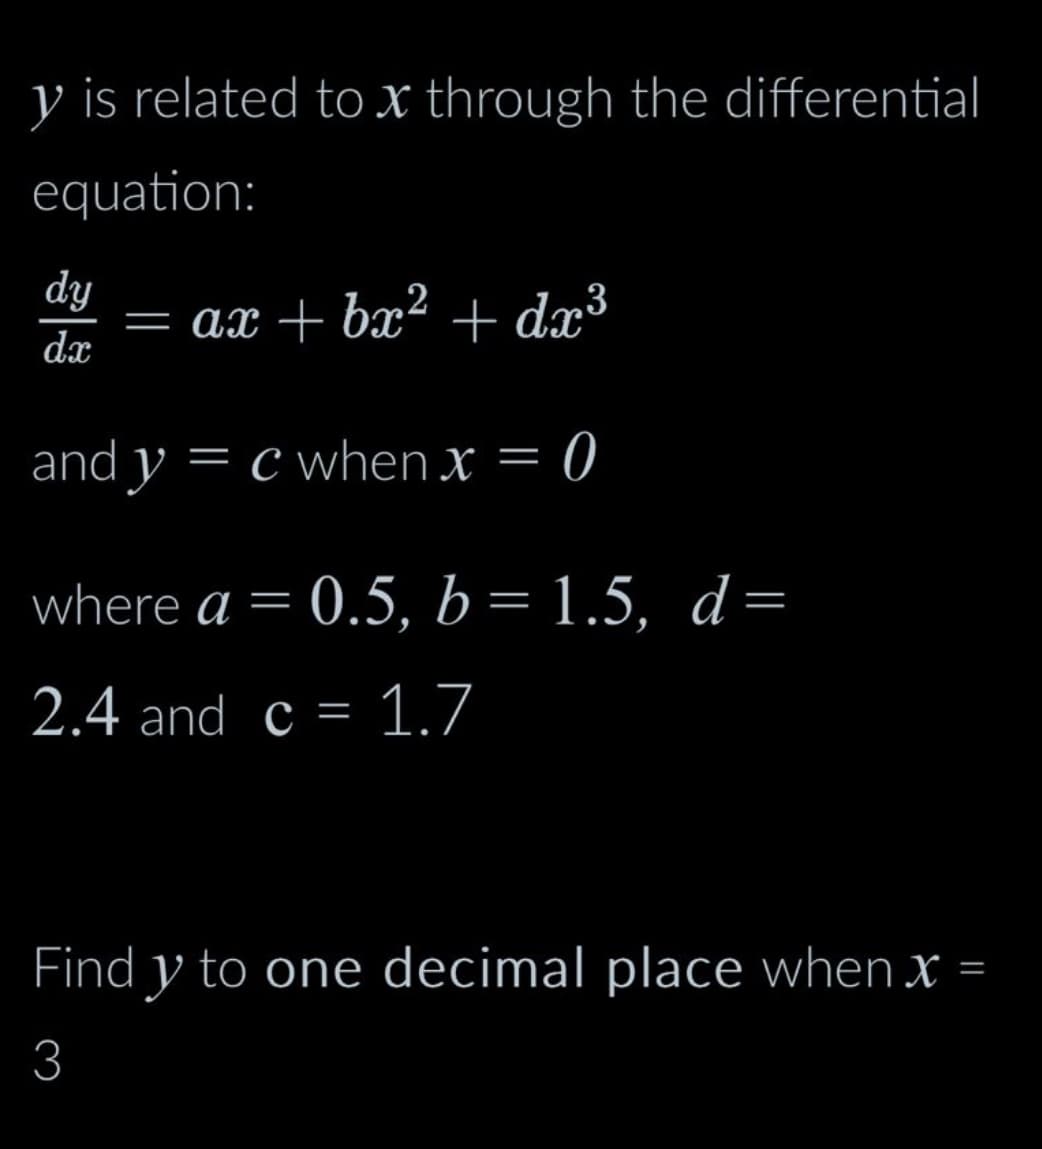 y is related to x through the differential
equation:
dy
d.x
and y = c when x = 0
= ax + bx² + dx³
where a = 0.5, b = 1.5, d =
2.4 and c = 1.7
Find y to one decimal place when x =
3